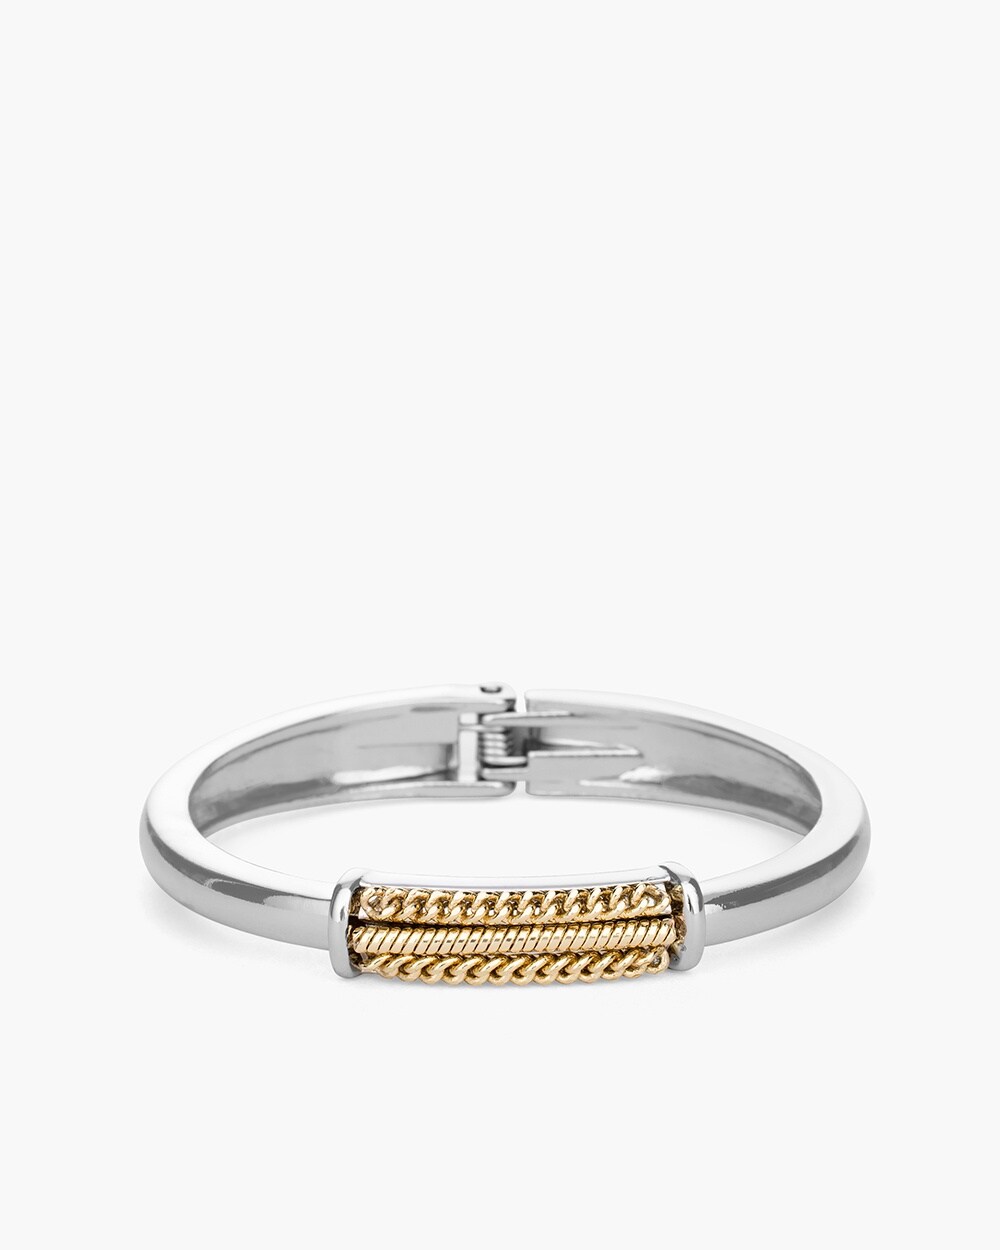 Silver-Tone Magnetic Bracelet With Gold-Tone Hinge